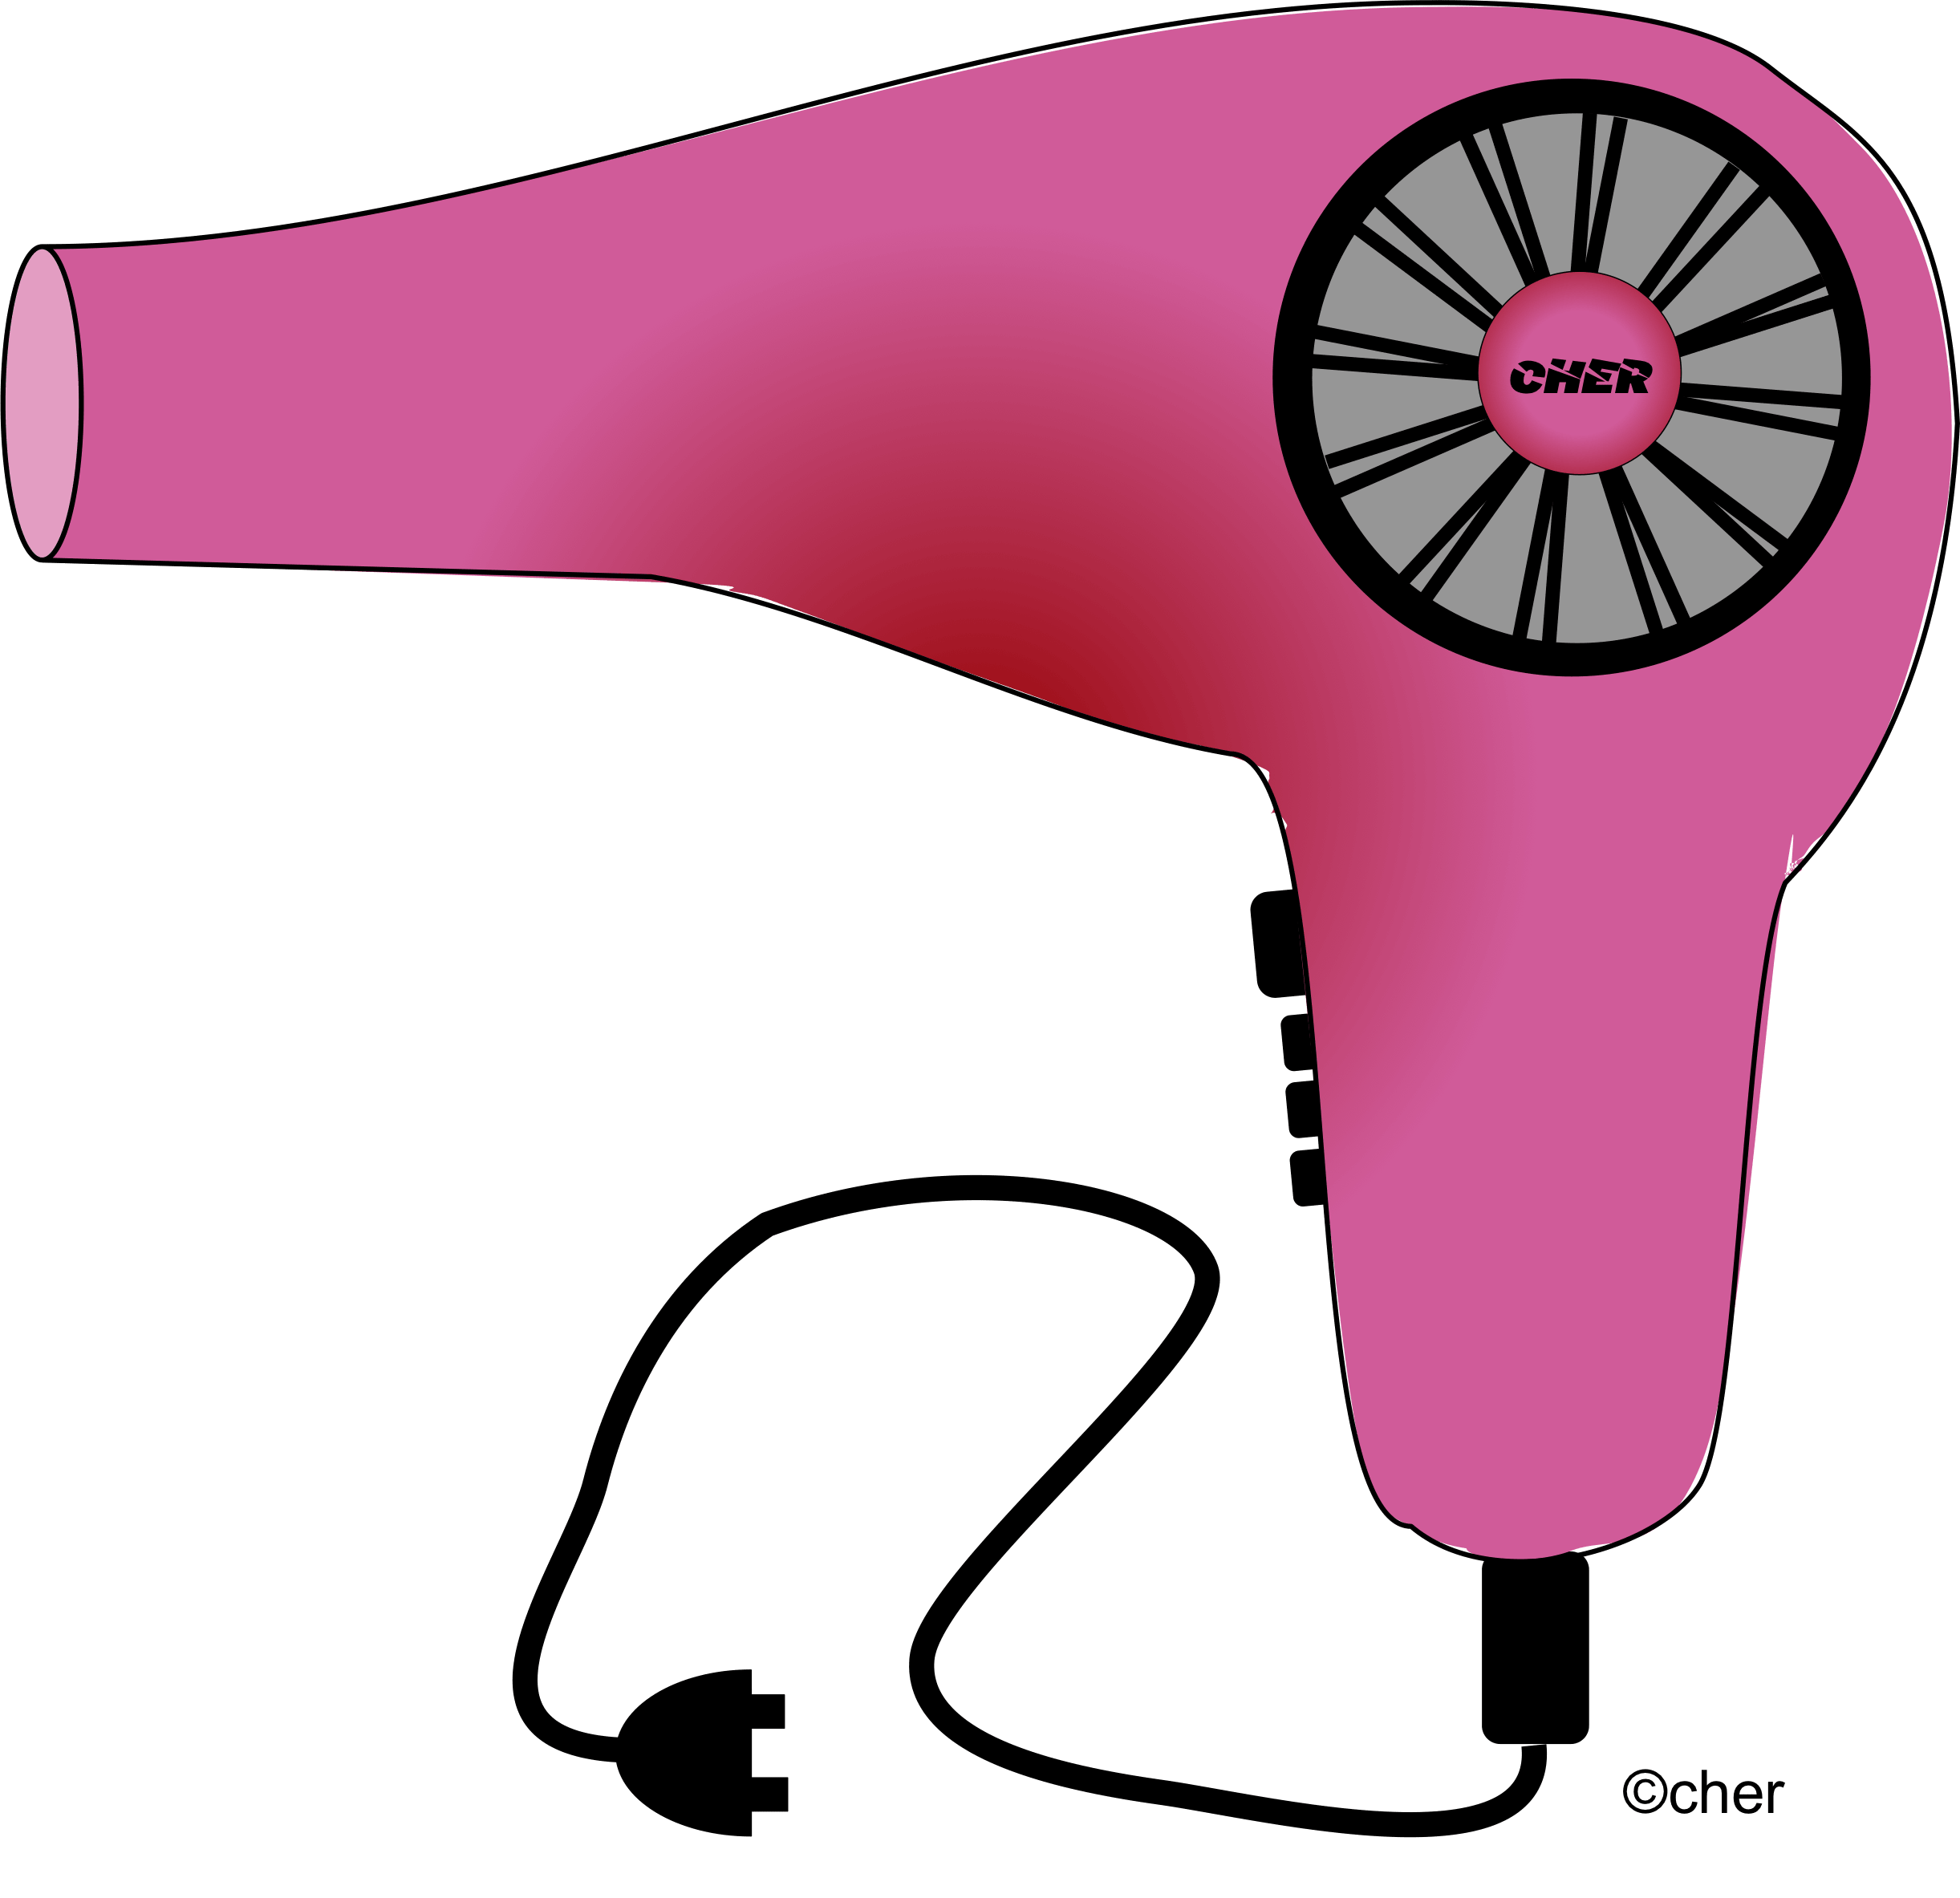 Blow Dryer And Scissors PNG - 66105